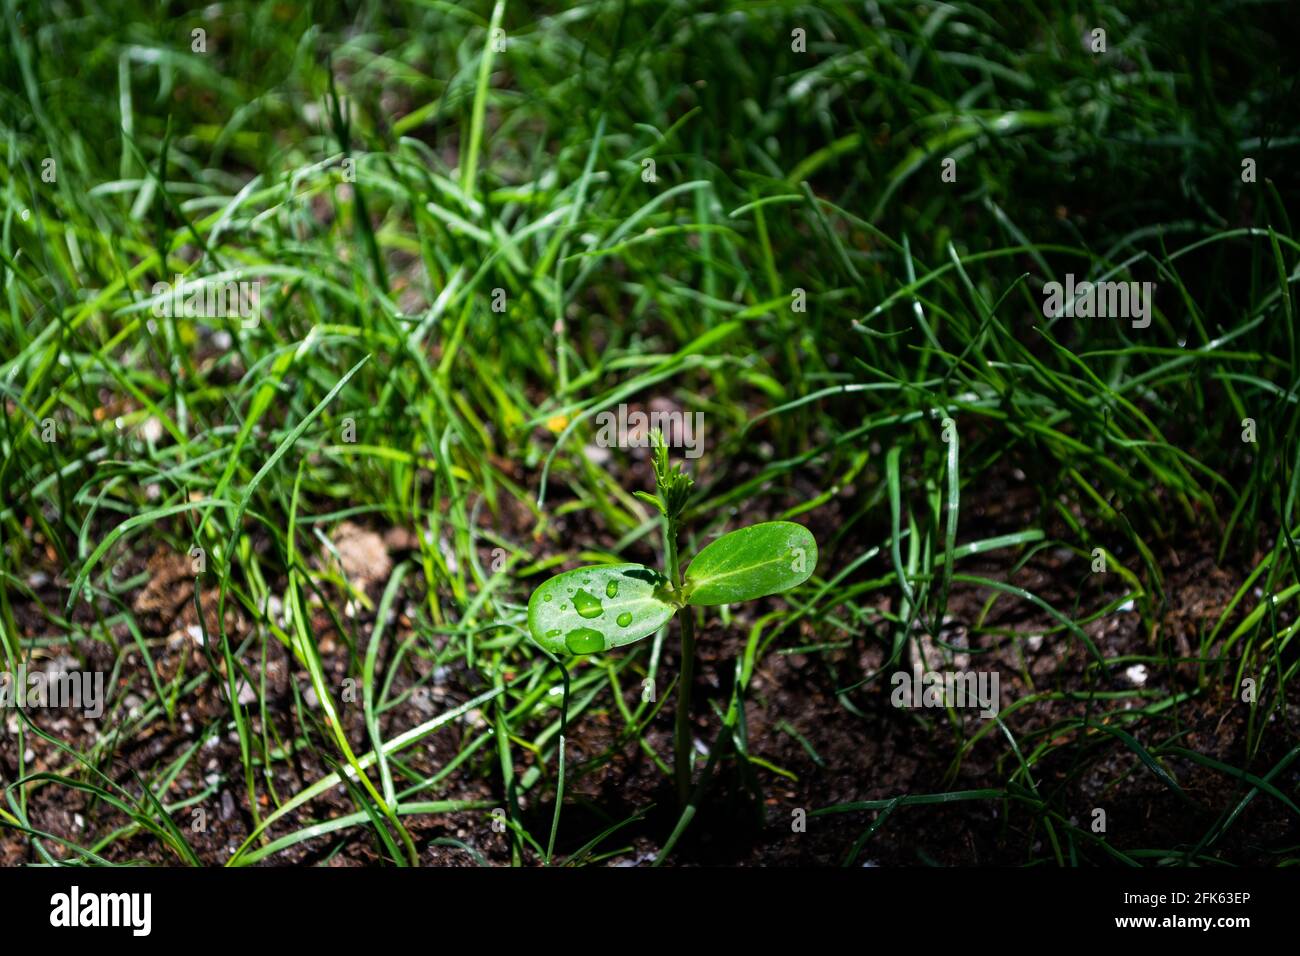 Closeup of plant seedling on the grassy ground Stock Photo